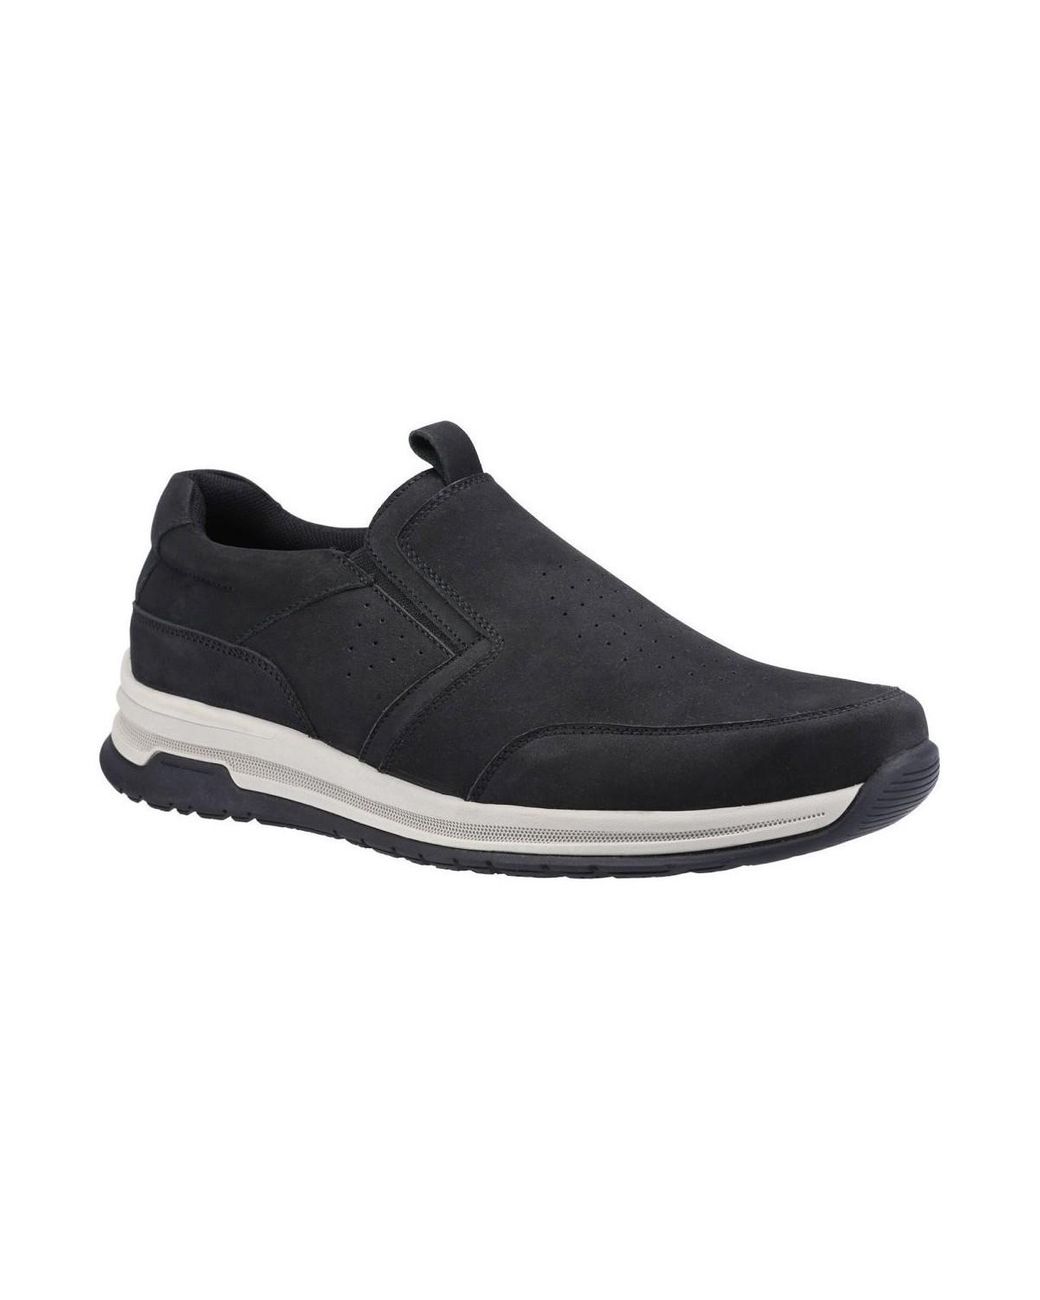 Hush Puppies Leather Cole Mens Slip On Trainers Slip-ons (shoes) in ...